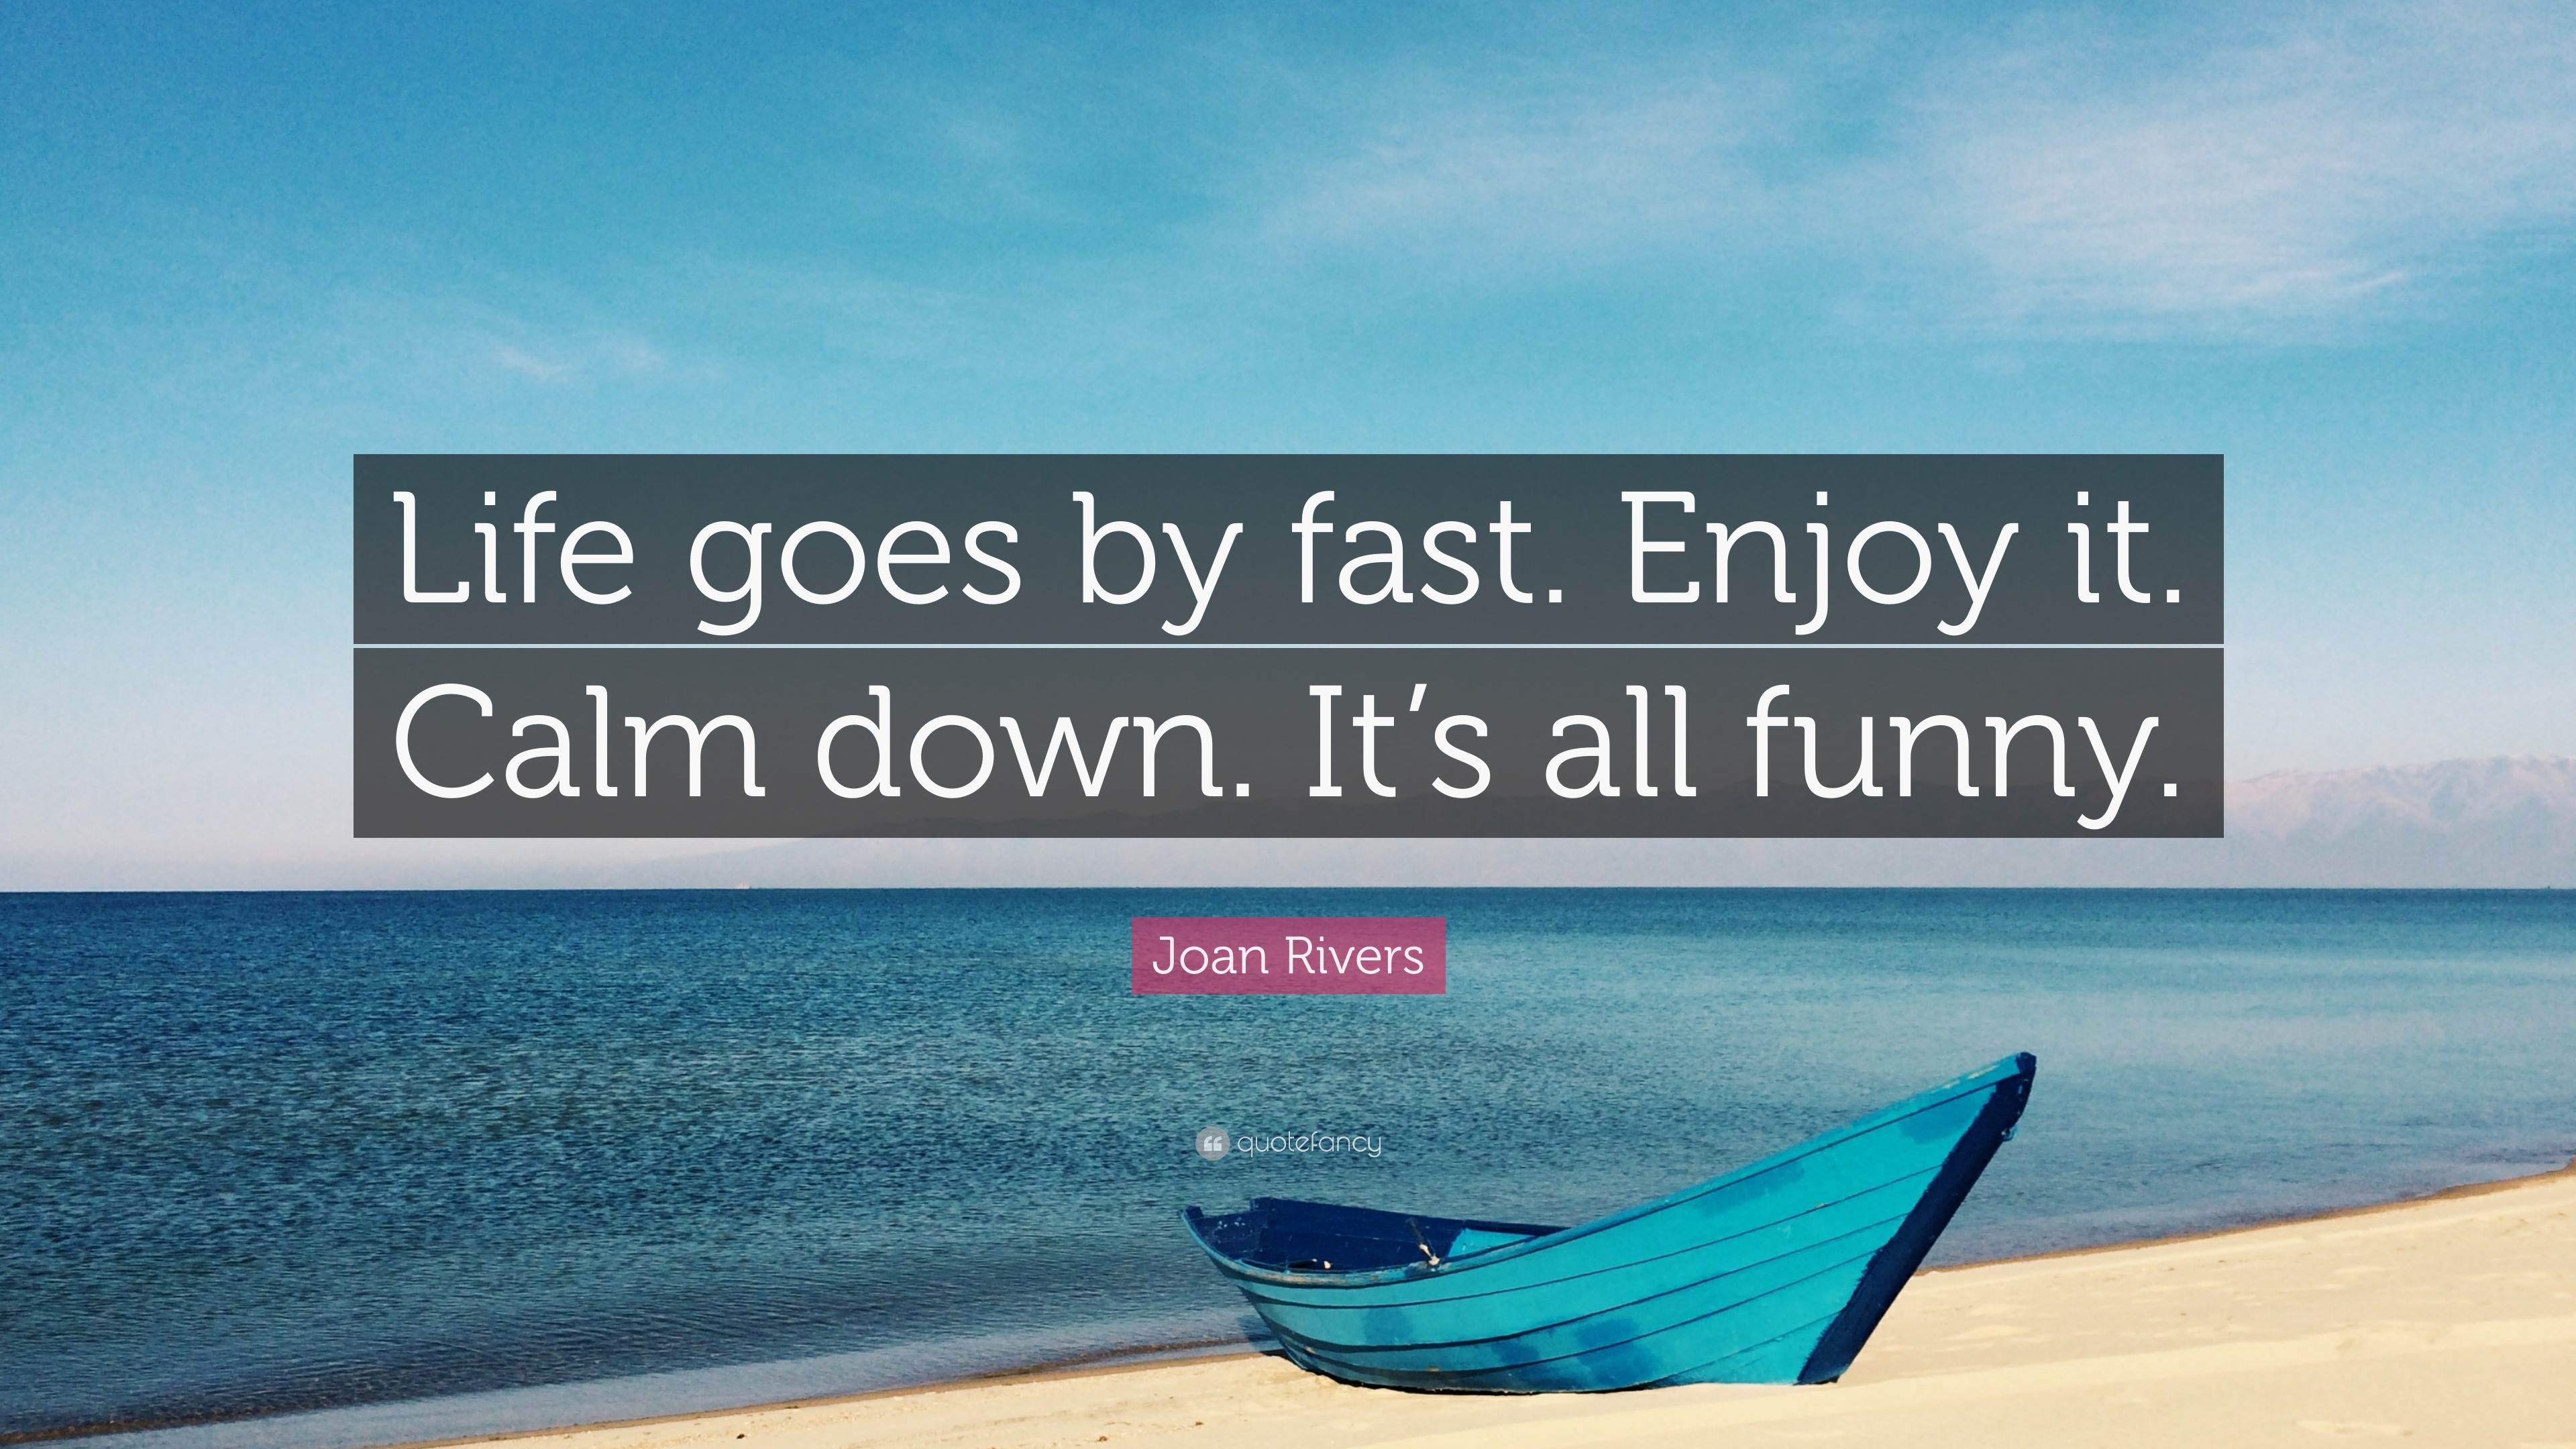 Joan Rivers Quote: “Life goes by fast. Enjoy it. Calm down. It's all funny.”